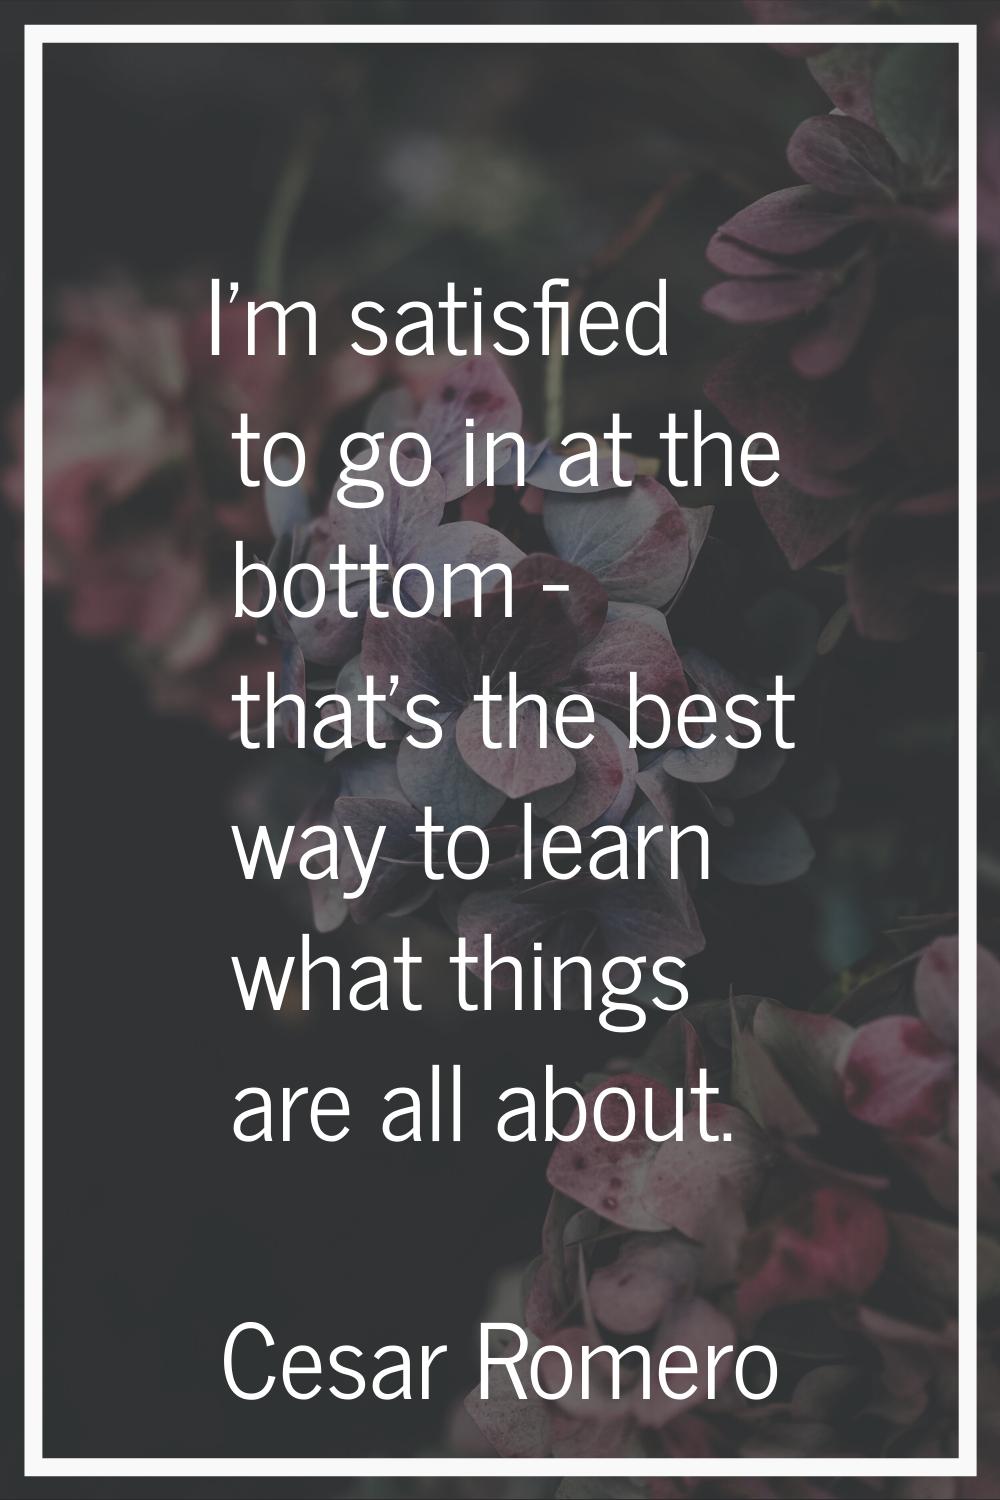 I'm satisfied to go in at the bottom - that's the best way to learn what things are all about.